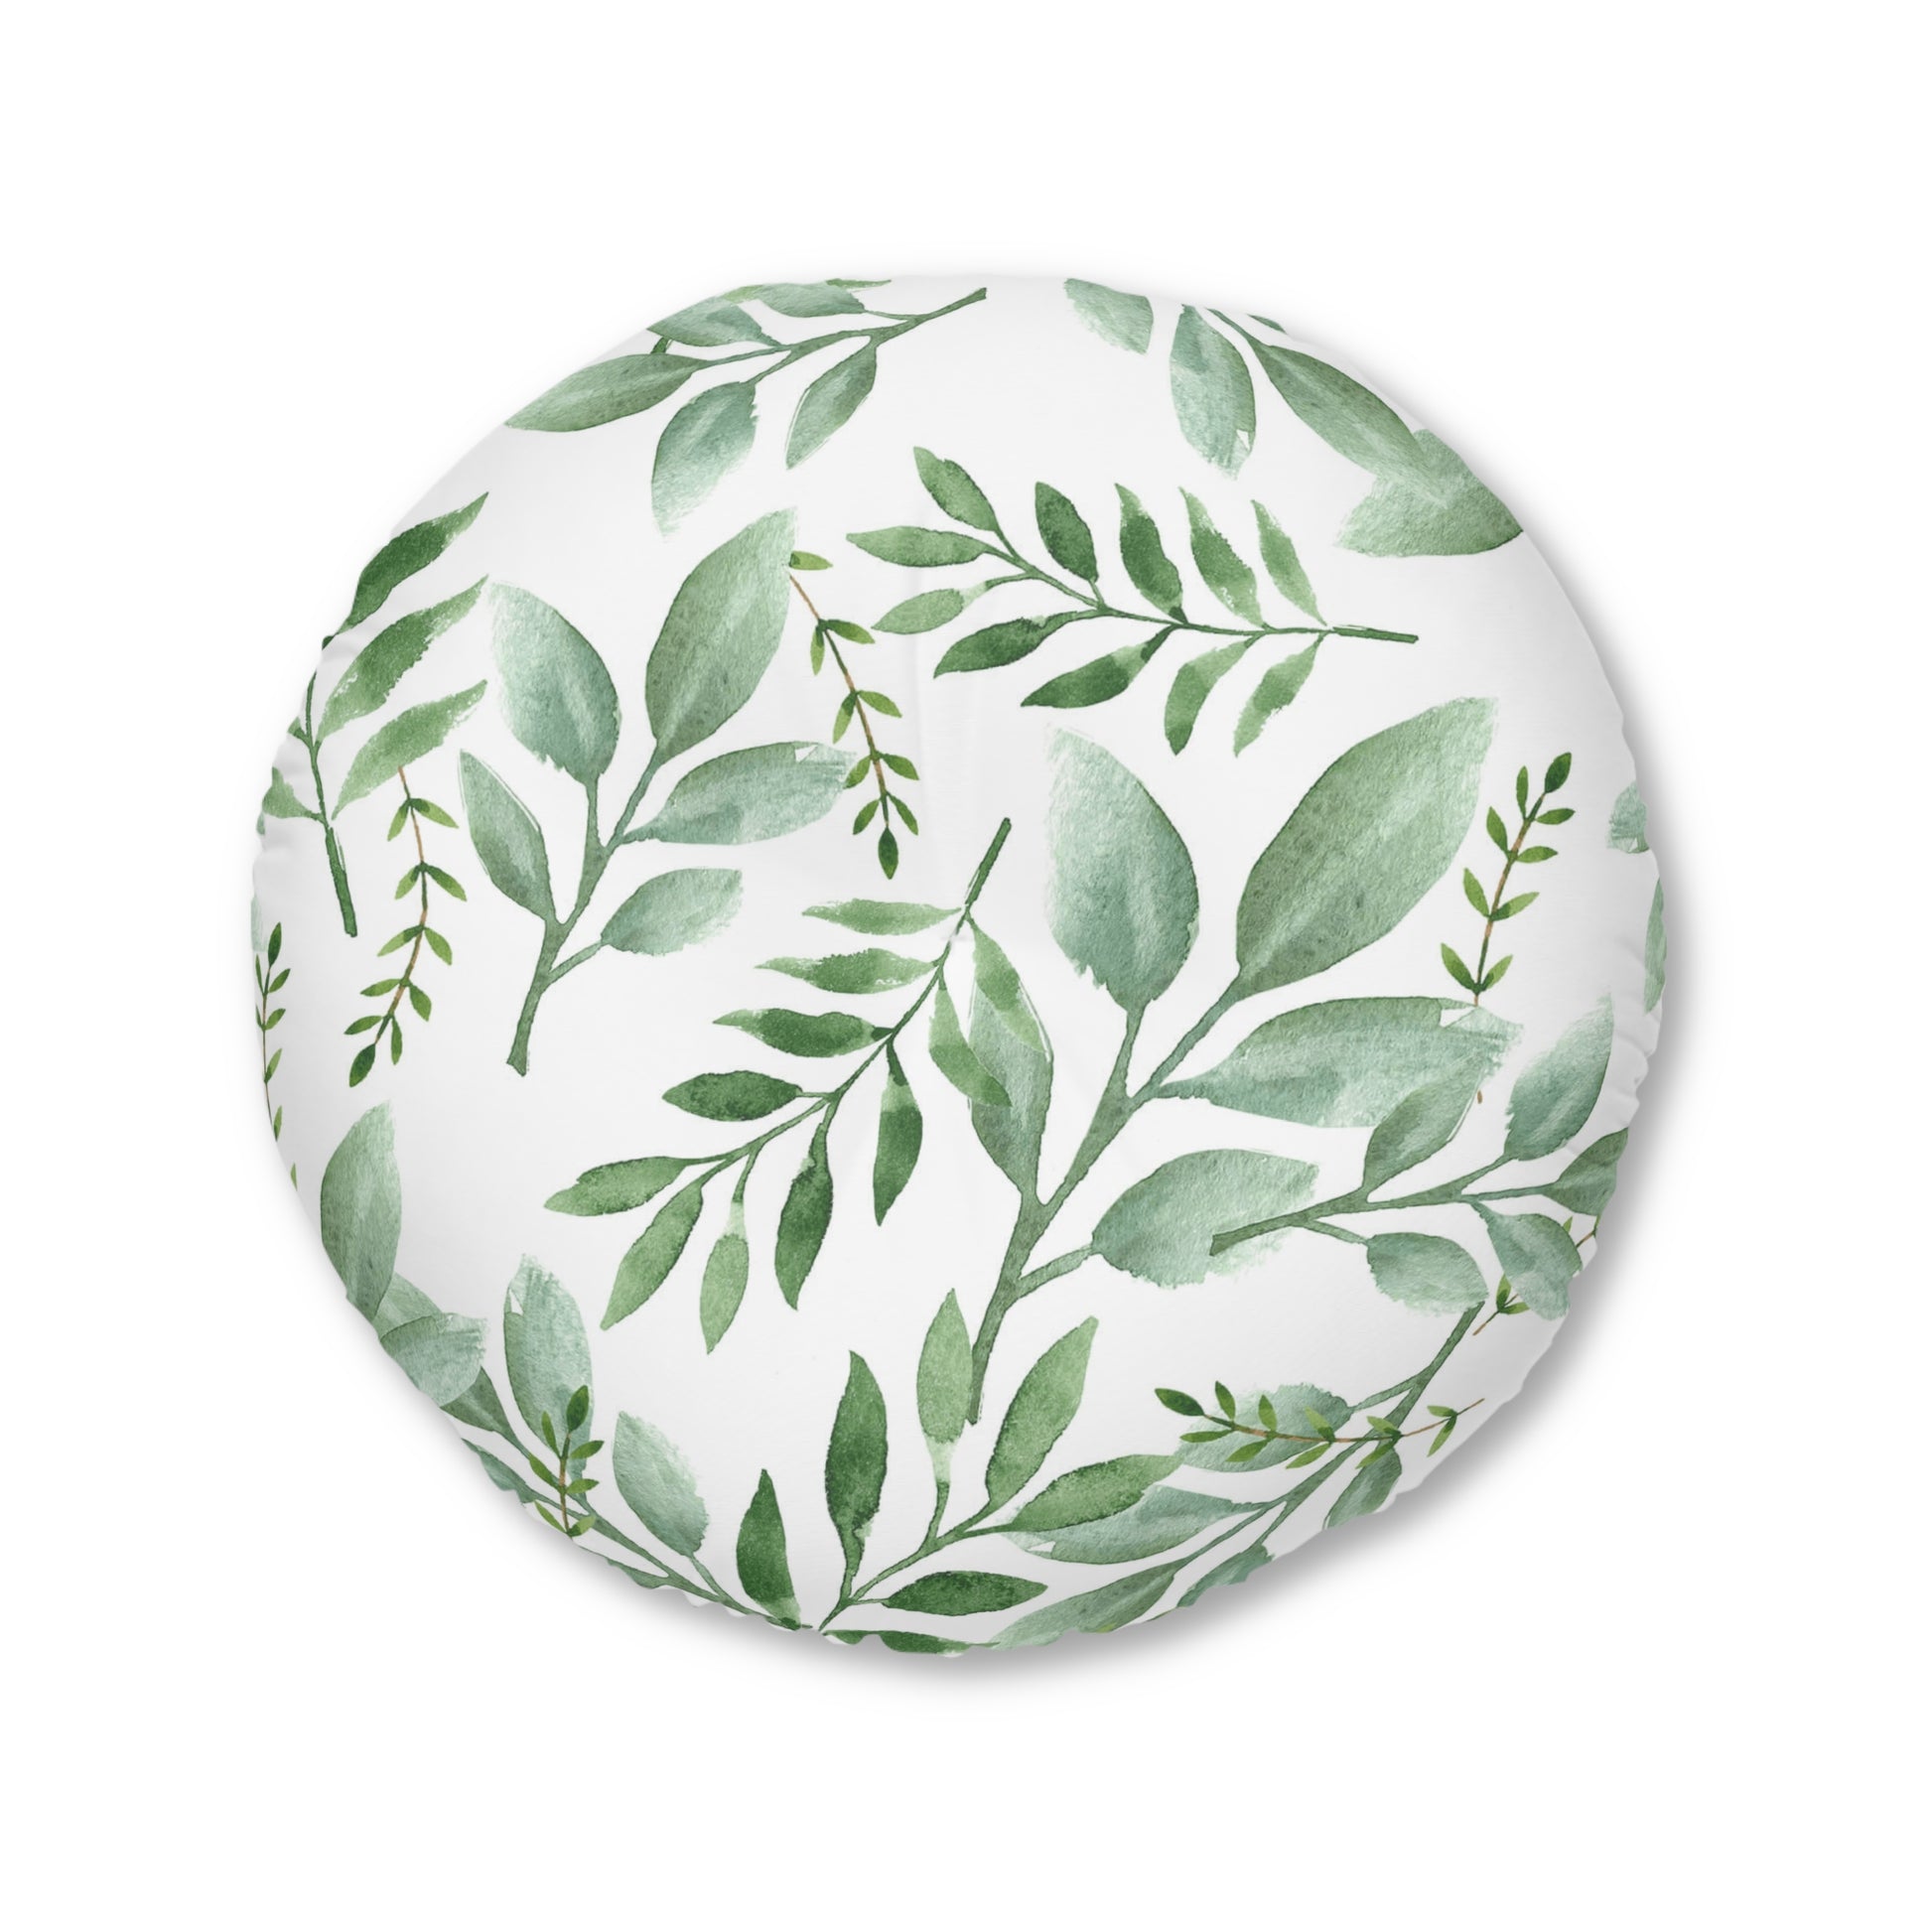 Printify's Botanical Round Tufted Floor-Pillow with a green botanical design on a white background is available in 2 sizes and made of polyester.